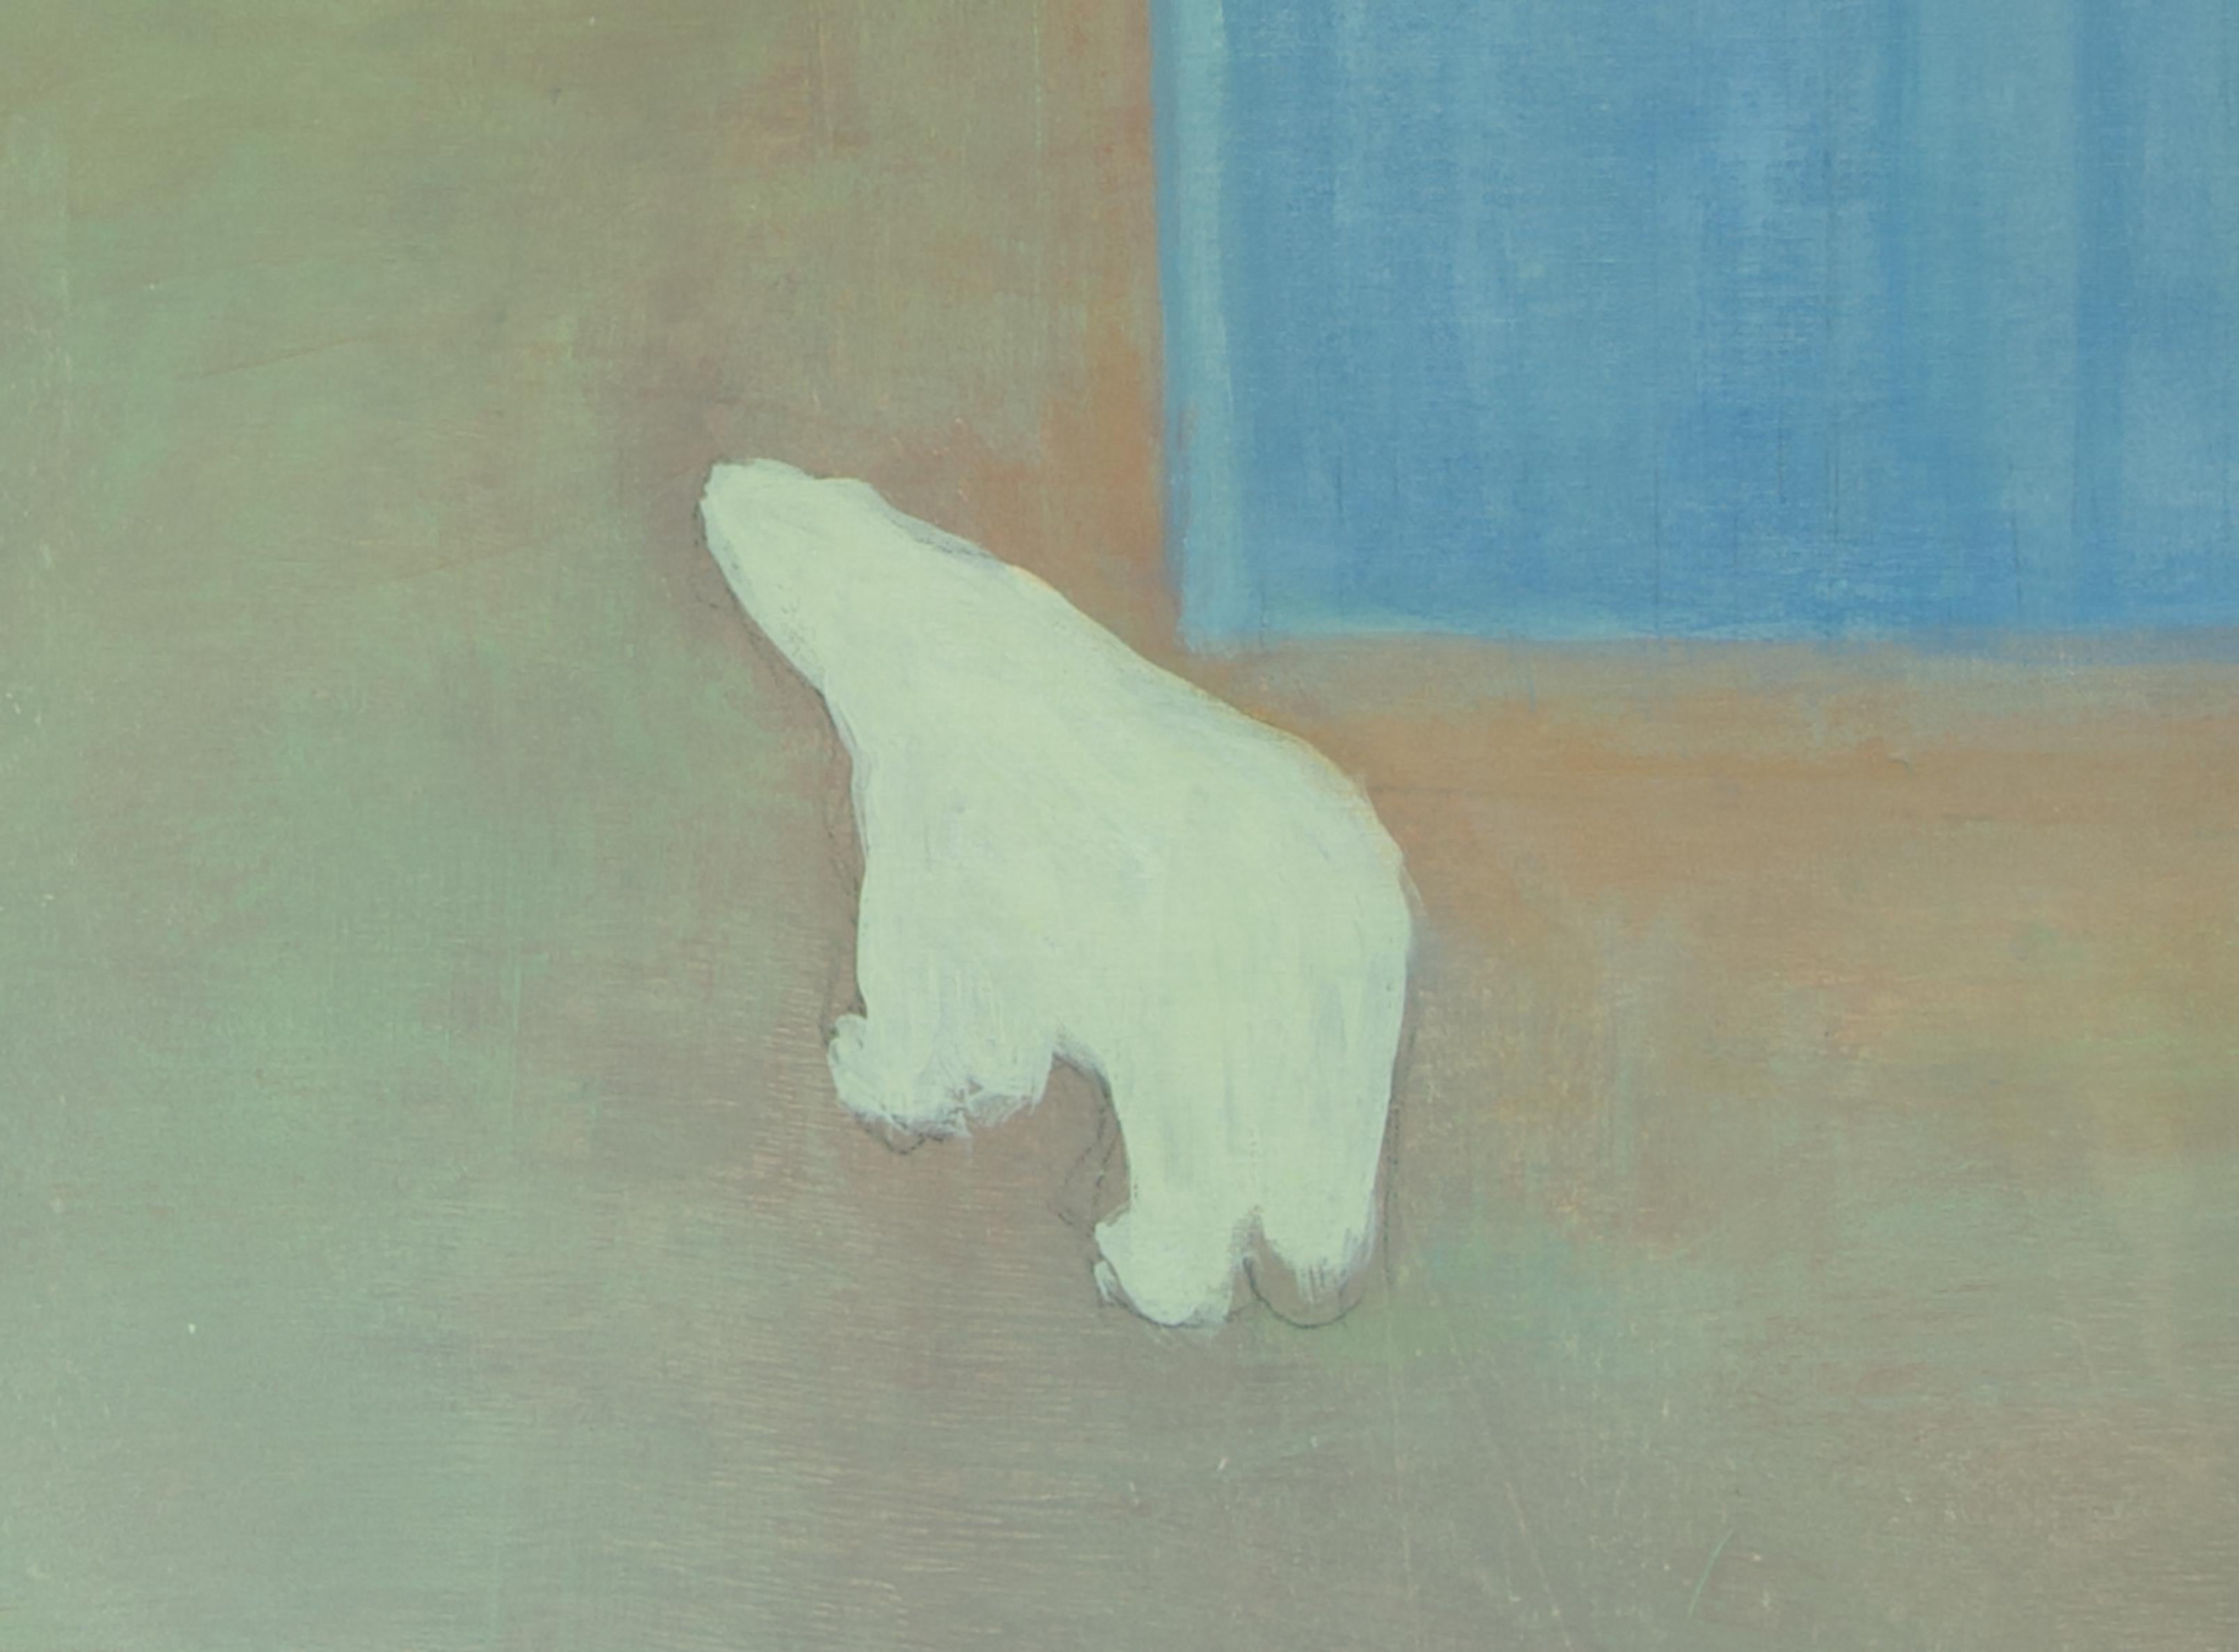 Based on her travels to the Svalbard Archipelago (Norway), Pia De Girolamo’s arctic landscape paintings portray moody, barren terrains, vast expanses of water and often a lone polar bear, acting as both witness and guide. Her diffuse light, spare